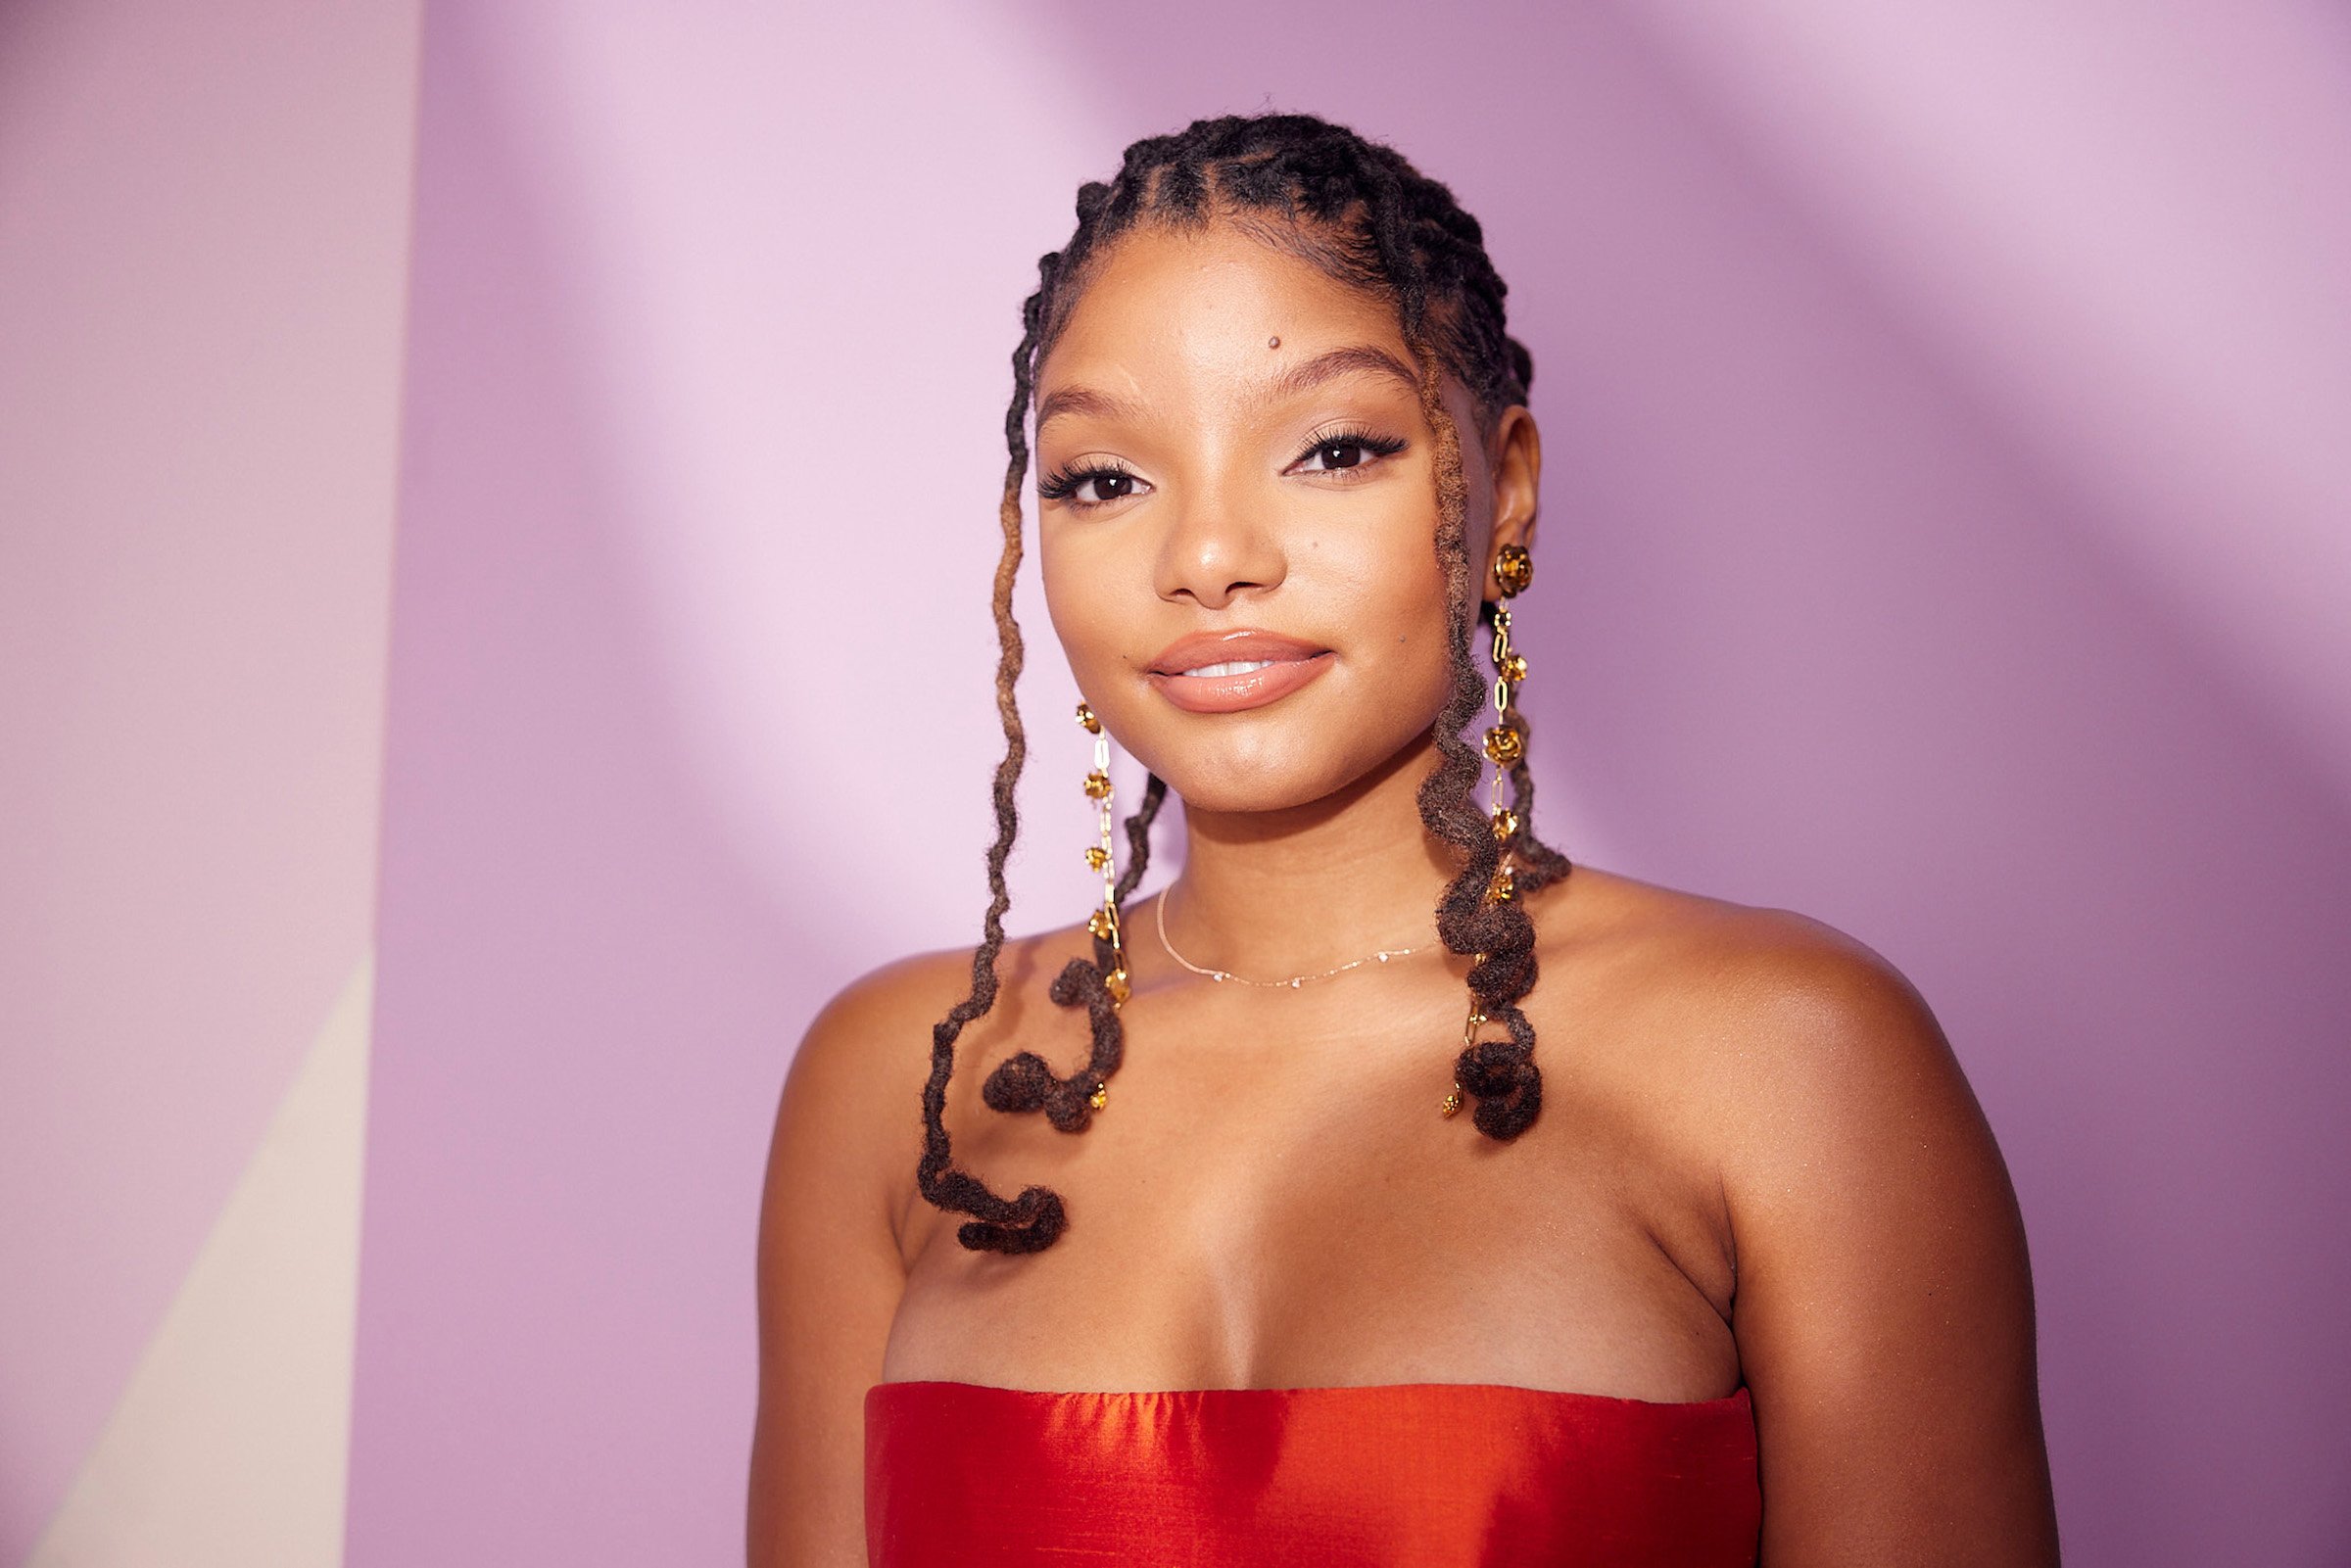 Halle Bailey, star of 'The Little Mermaid', wearing red